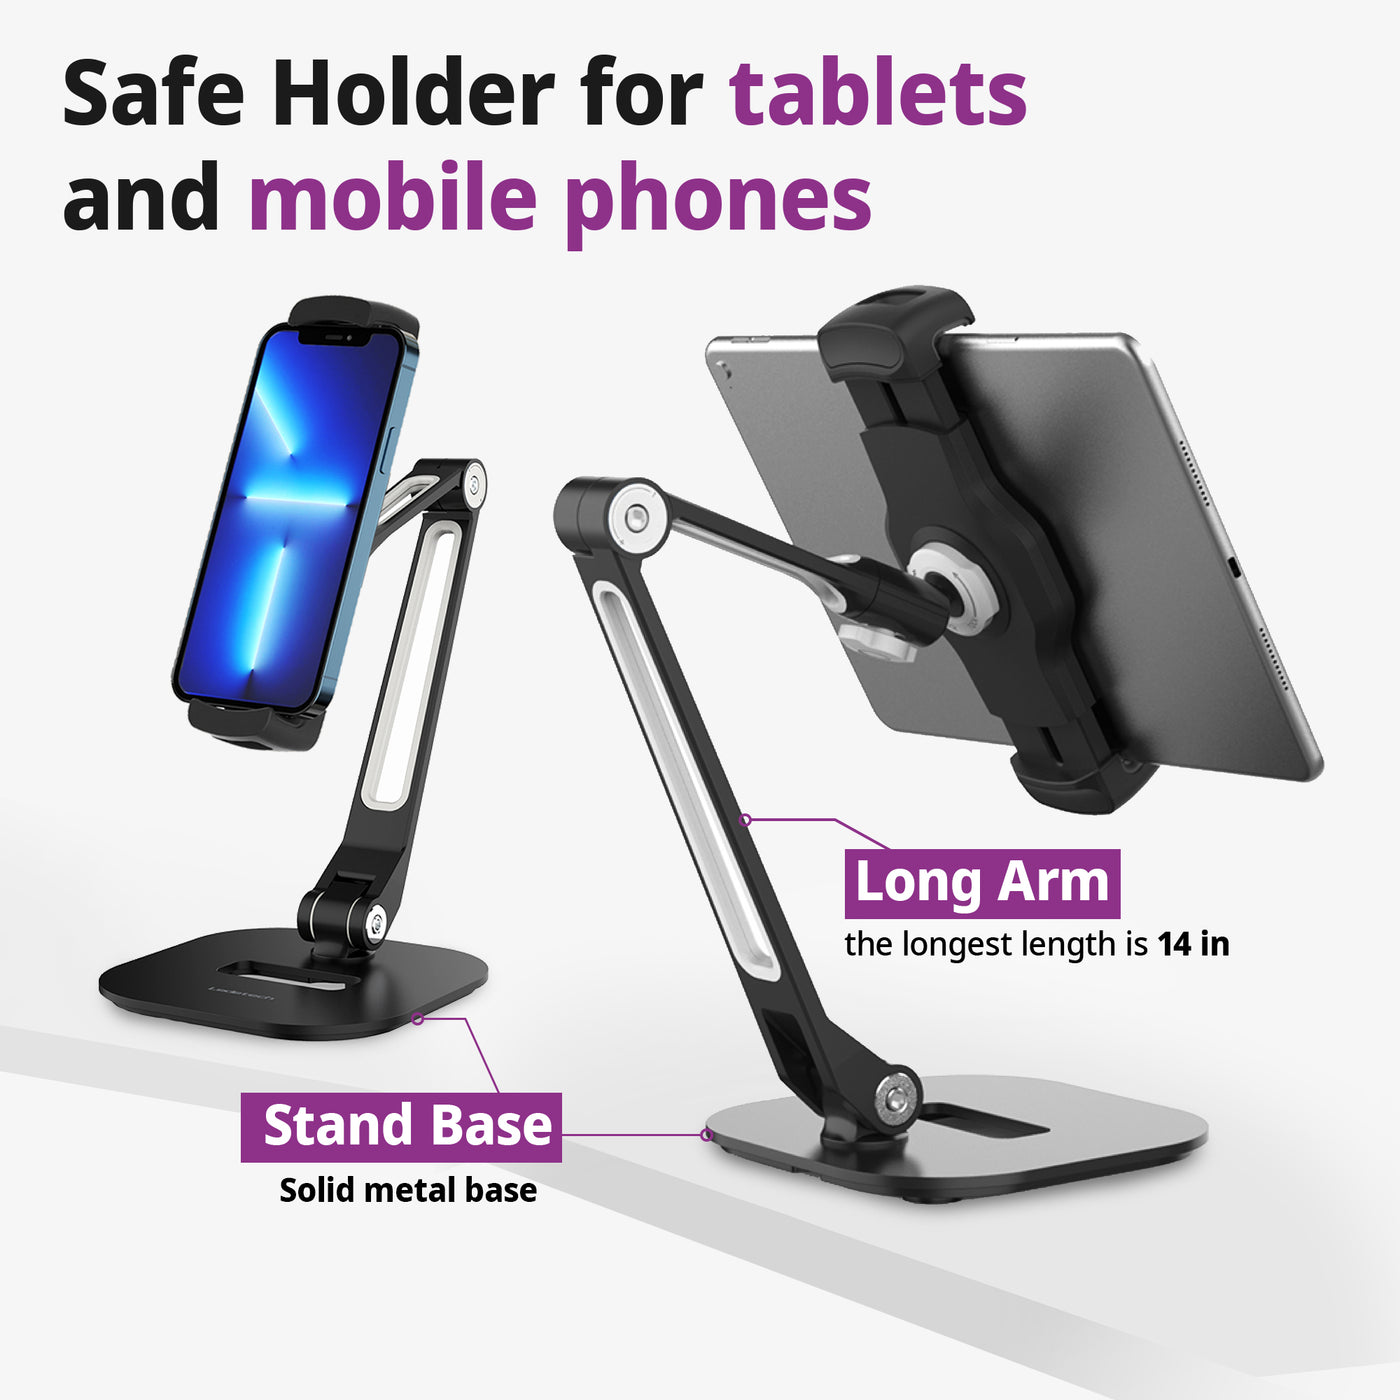 Smart Mount - Tablet & Cell Phone Holder (Long Arm/Stand Base)